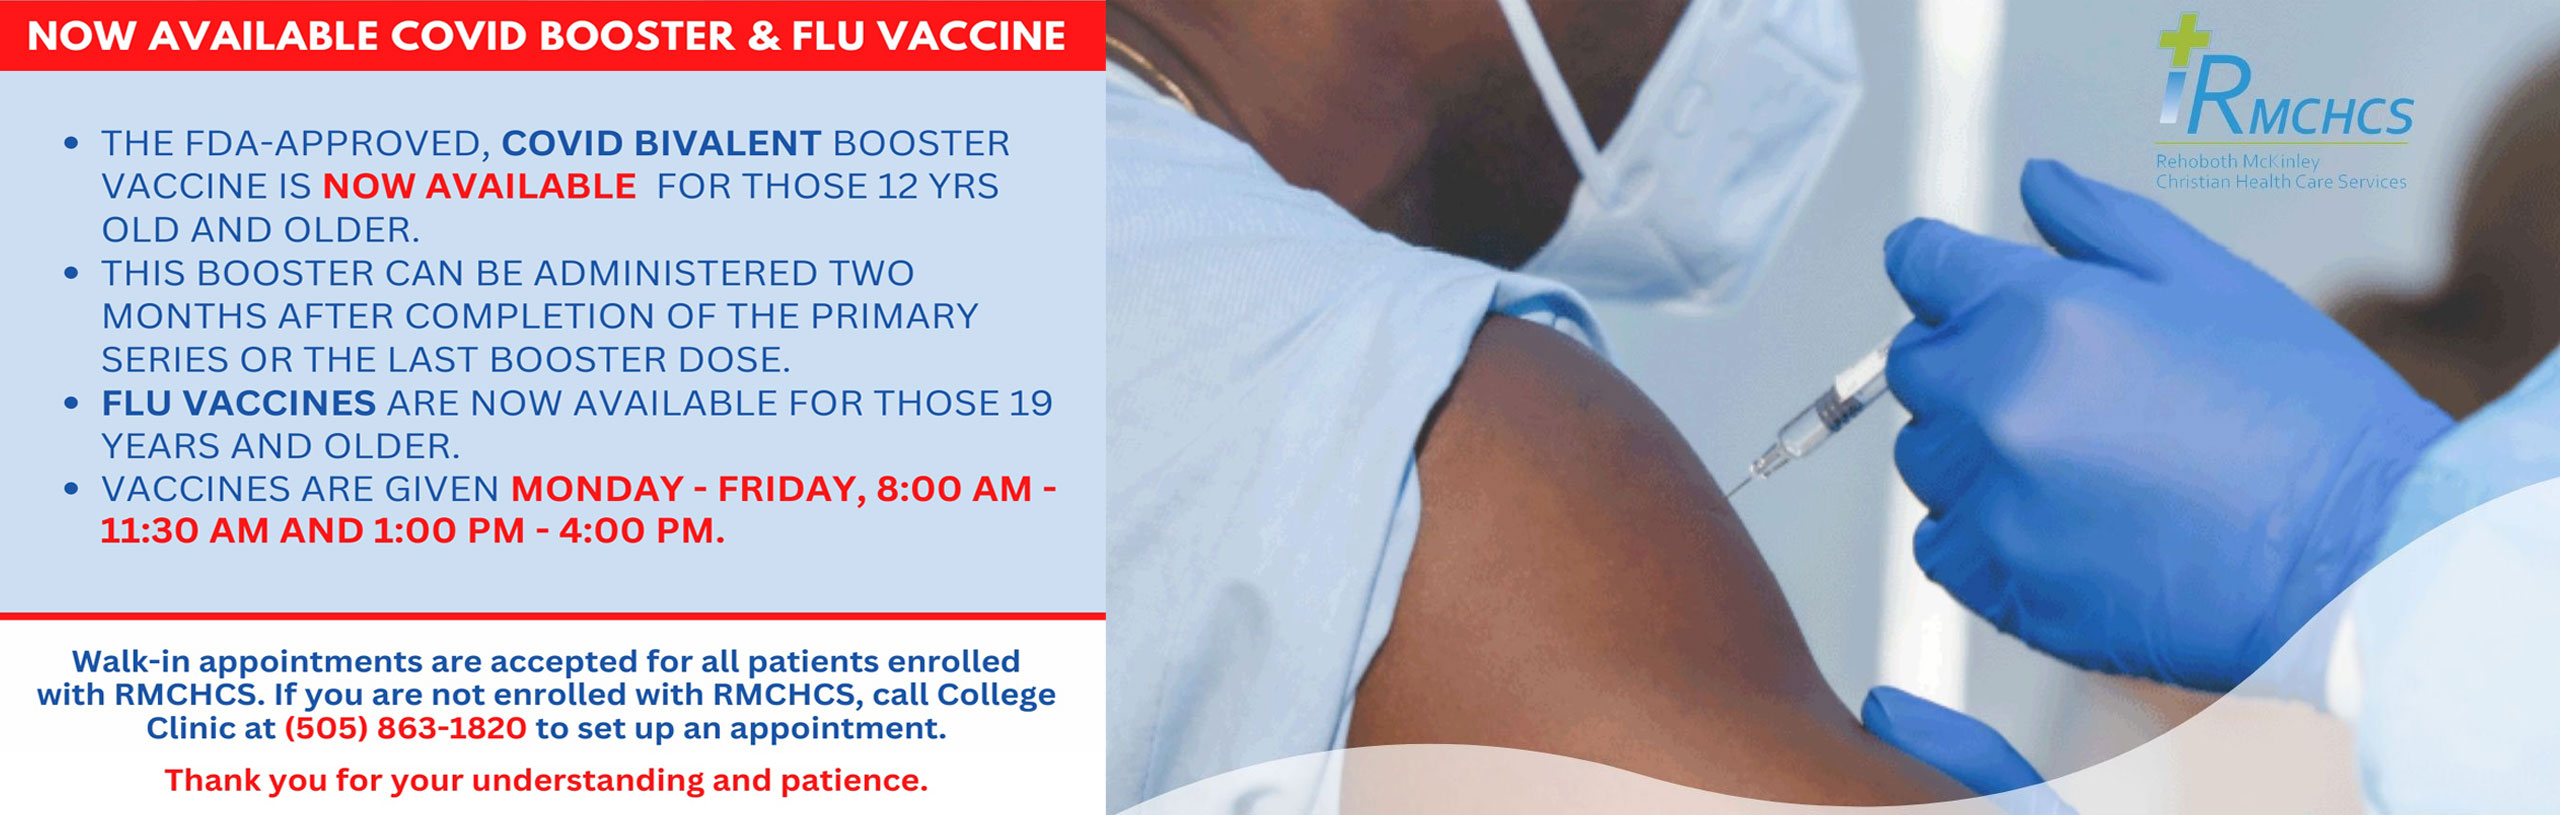 NOW AVAILABLE COVID BOOSTER AND FLU VACCINE

*THE FDA-APPROVED, COVID BIVALENT BOOSTER VACCINE IS NOW AVAILABLE FOR THOSE 12 YEARS AND OLDER.
*THIS BOOSTER CAN BE AD,INISTERED TWO MONTHS AFTER COMPETITION OF THE PRIMARY SERIES OR THE LAST BOOSTER DOSE.
*FLU VACCINES ARE GIVEN
MONDAY-FRIDAY, 8:00 AM - 11:30 AM AND 1:00 PM - 4:00 PM.

RMCHCS